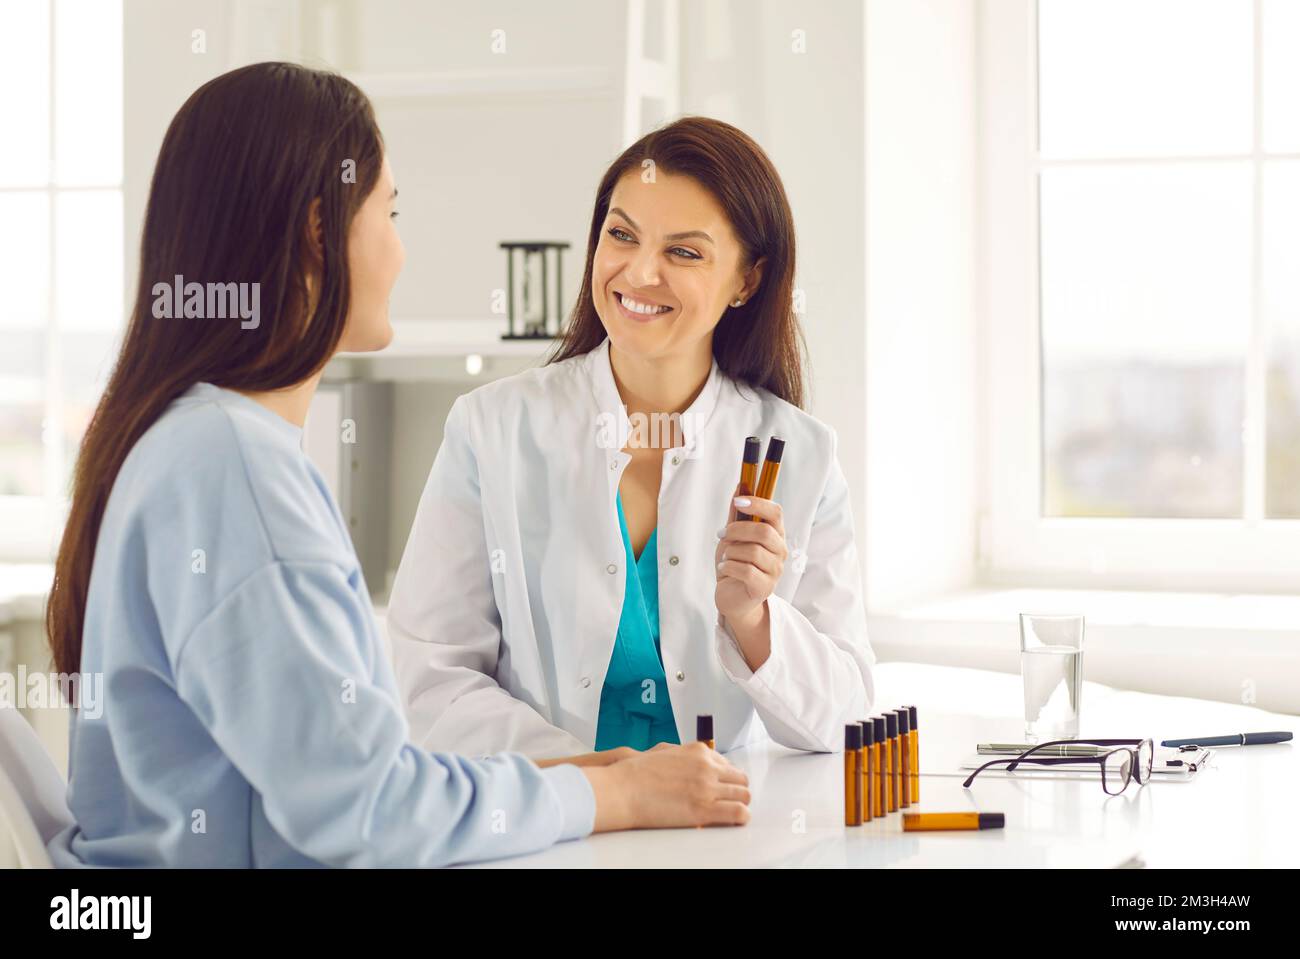 Friendly smart woman doctor tells her patient about benefits of essential oils in treatment. Stock Photo